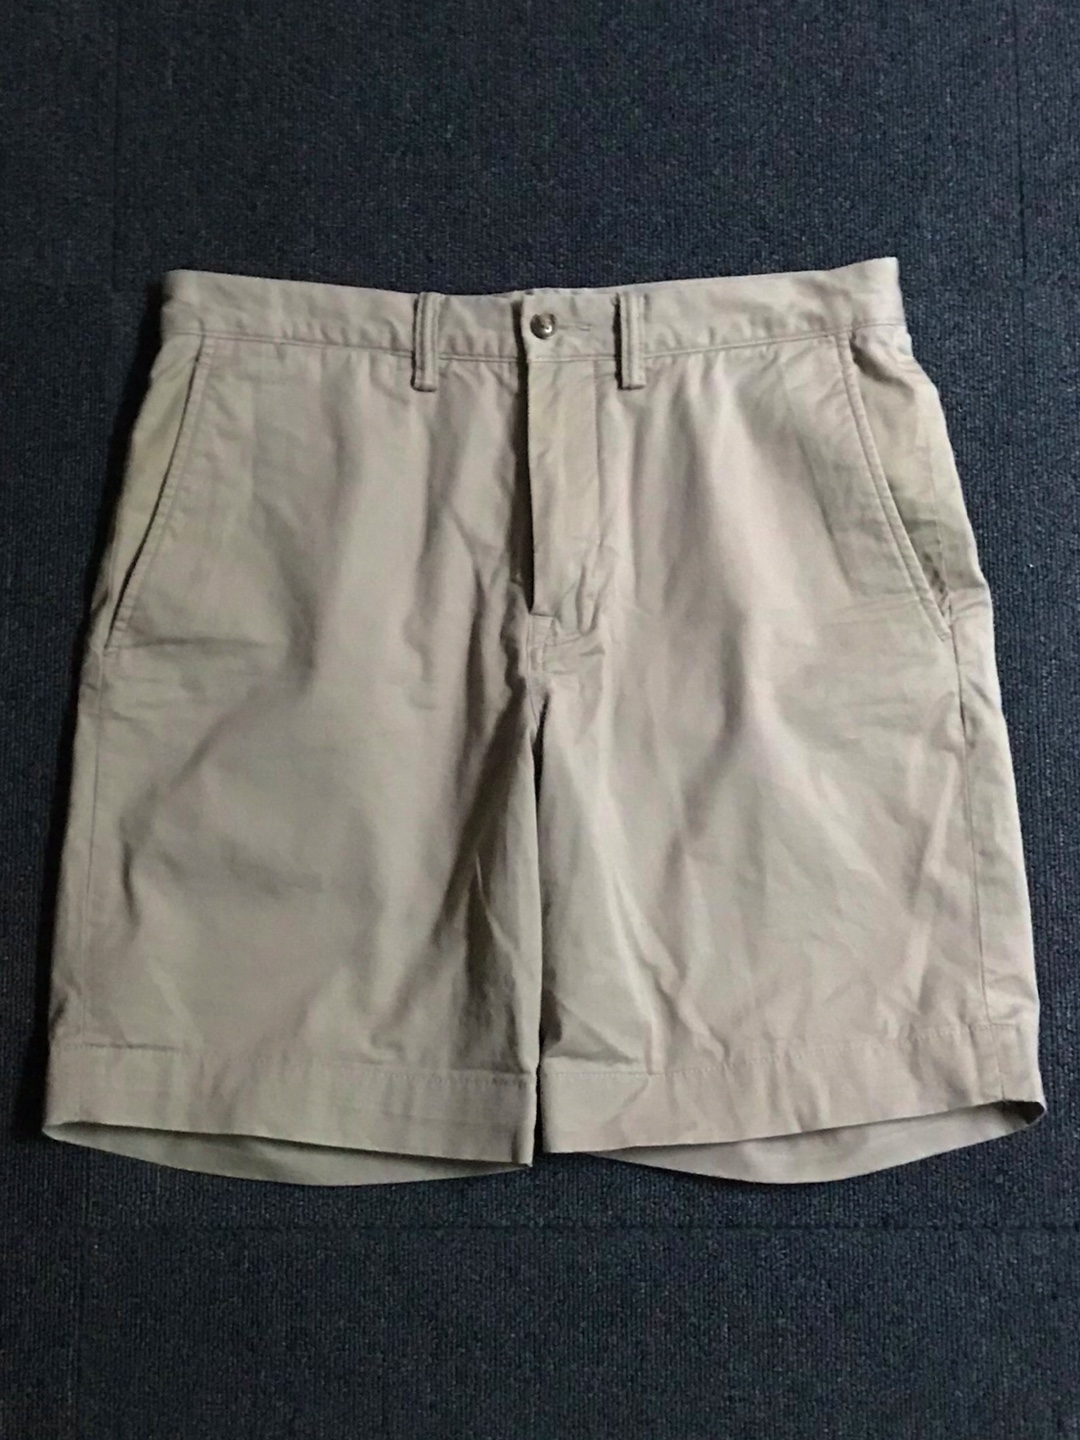 Polo RL stretch classic fit chino shorts (30 size, ~31인치 추천)